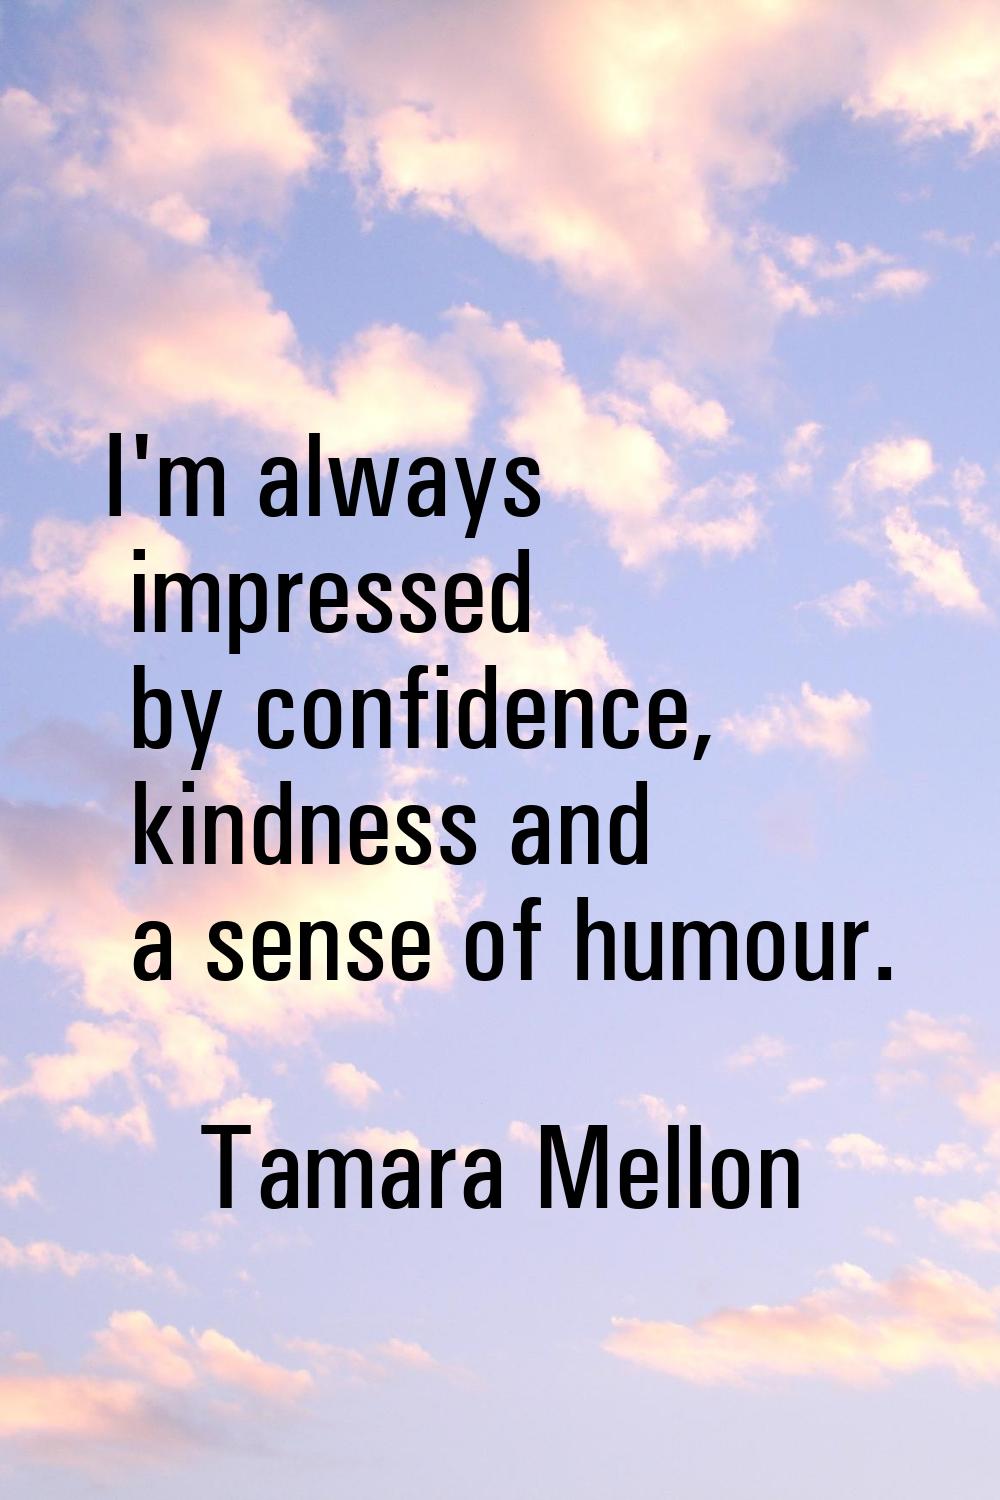 I'm always impressed by confidence, kindness and a sense of humour.